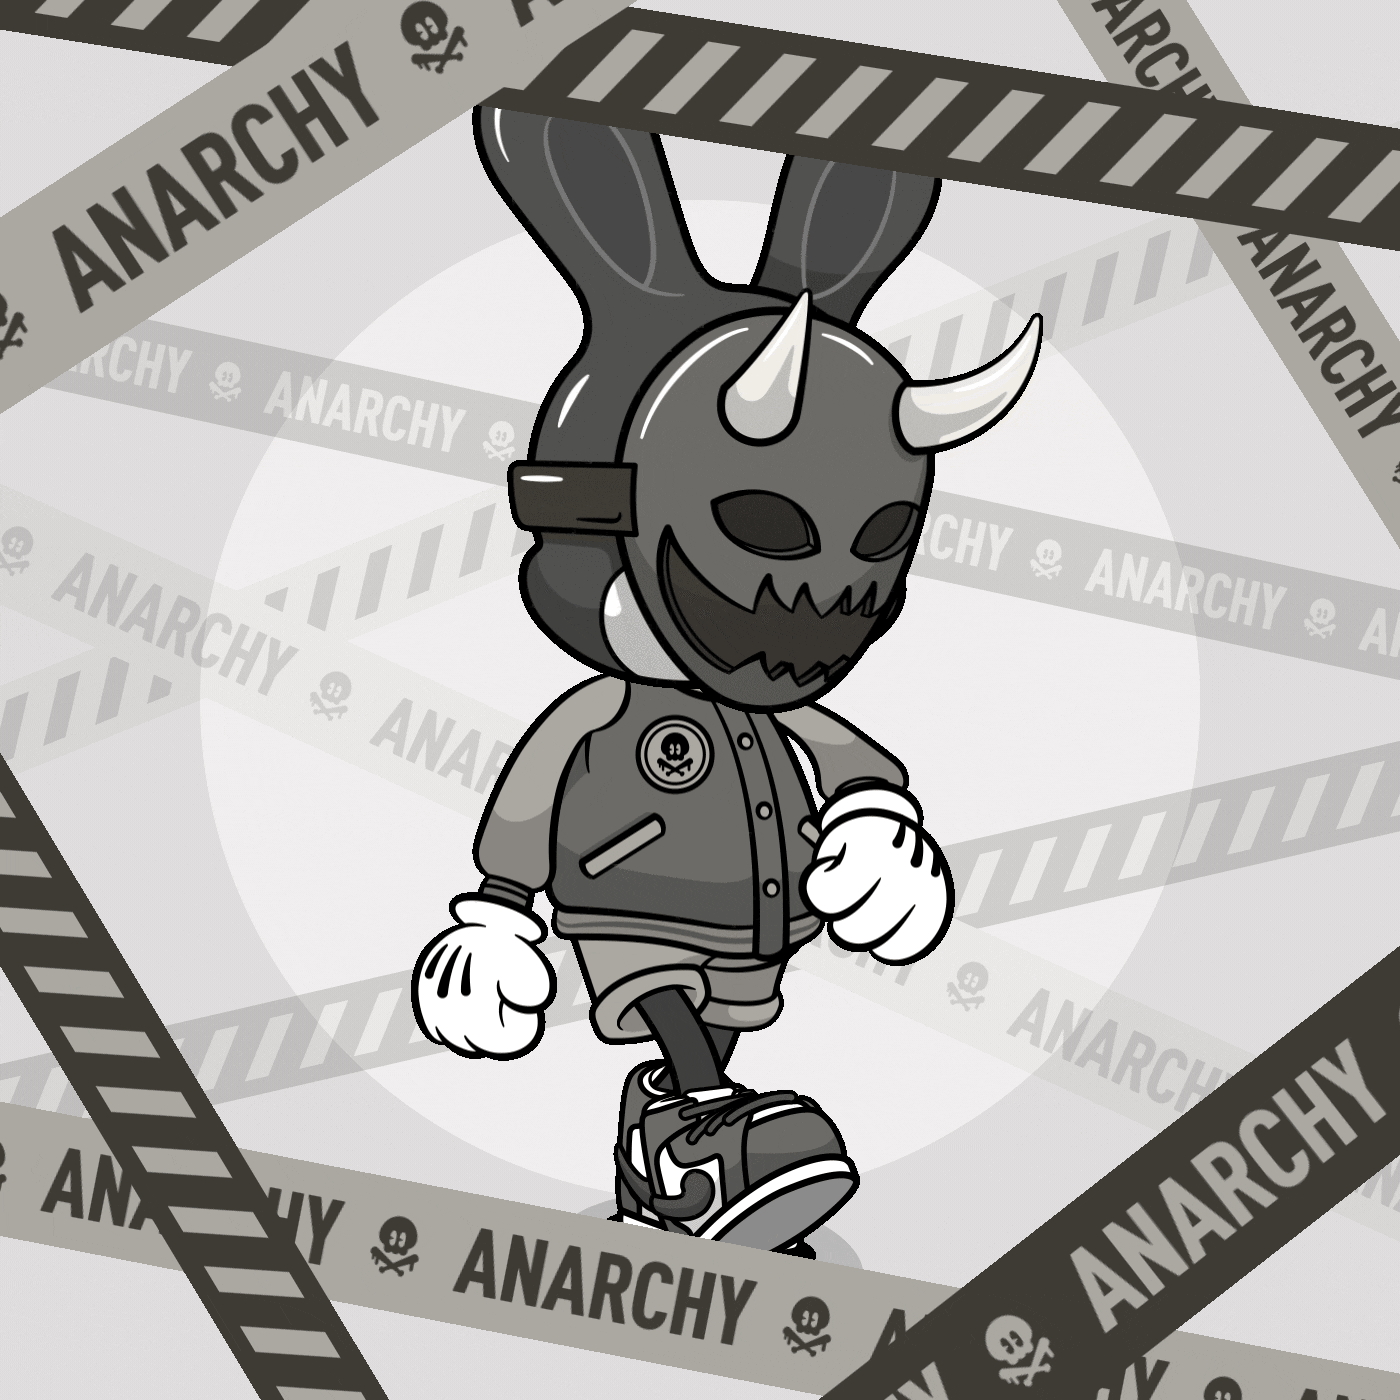 The ANARCHY #0415